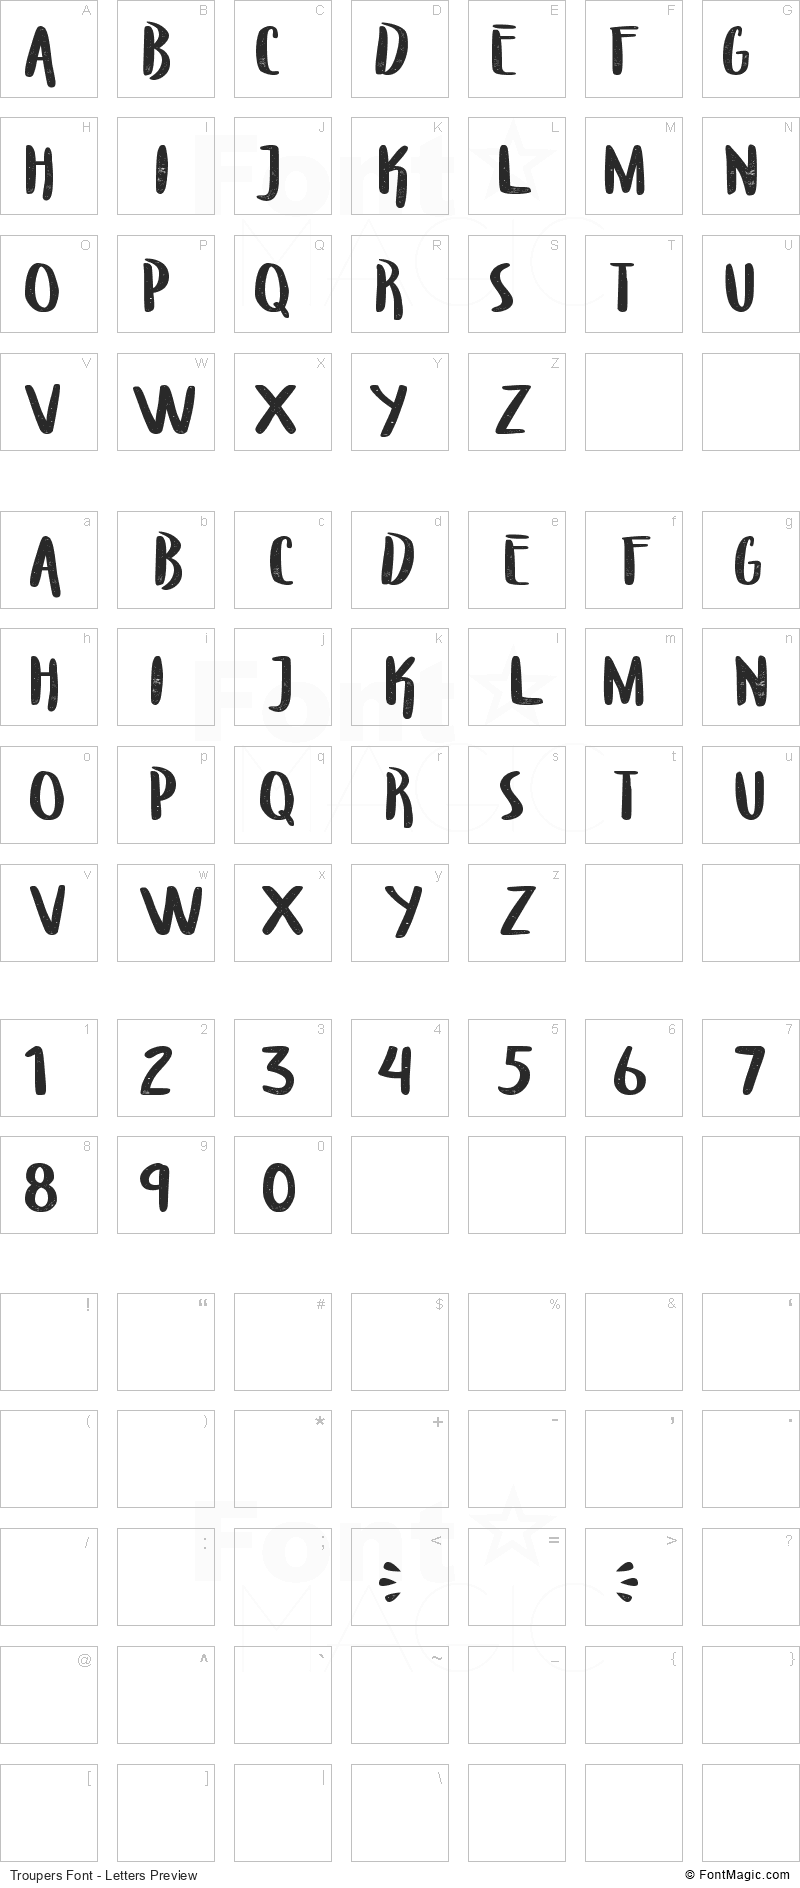 Troupers Font - All Latters Preview Chart